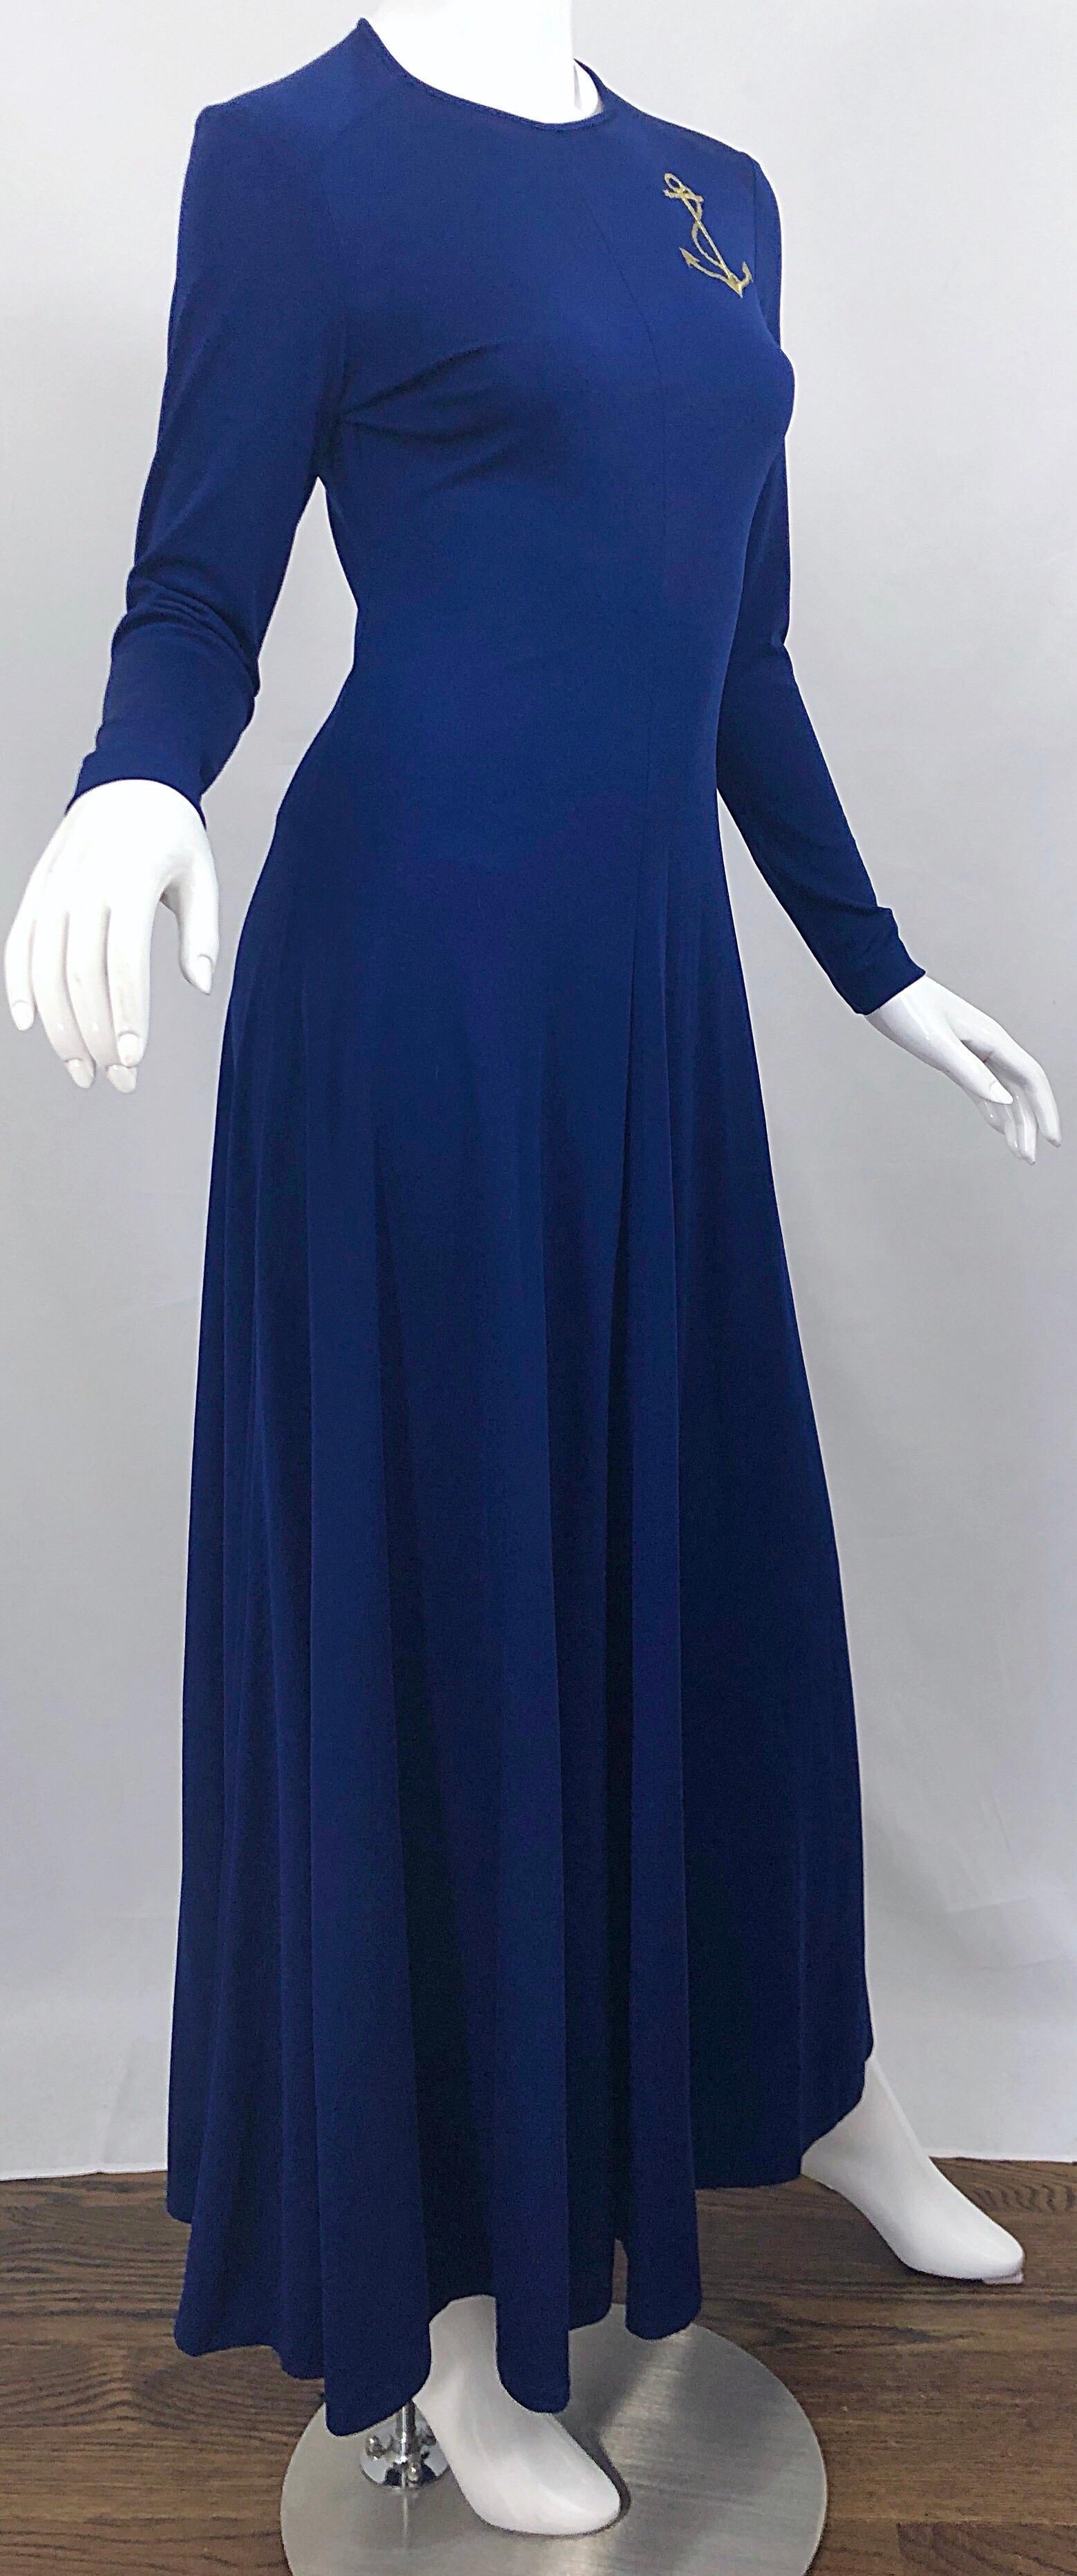 Amazing 1970s Nautical Navy Blue + Gold Anchor Patch Vintage Jersey maxi Dress For Sale 1